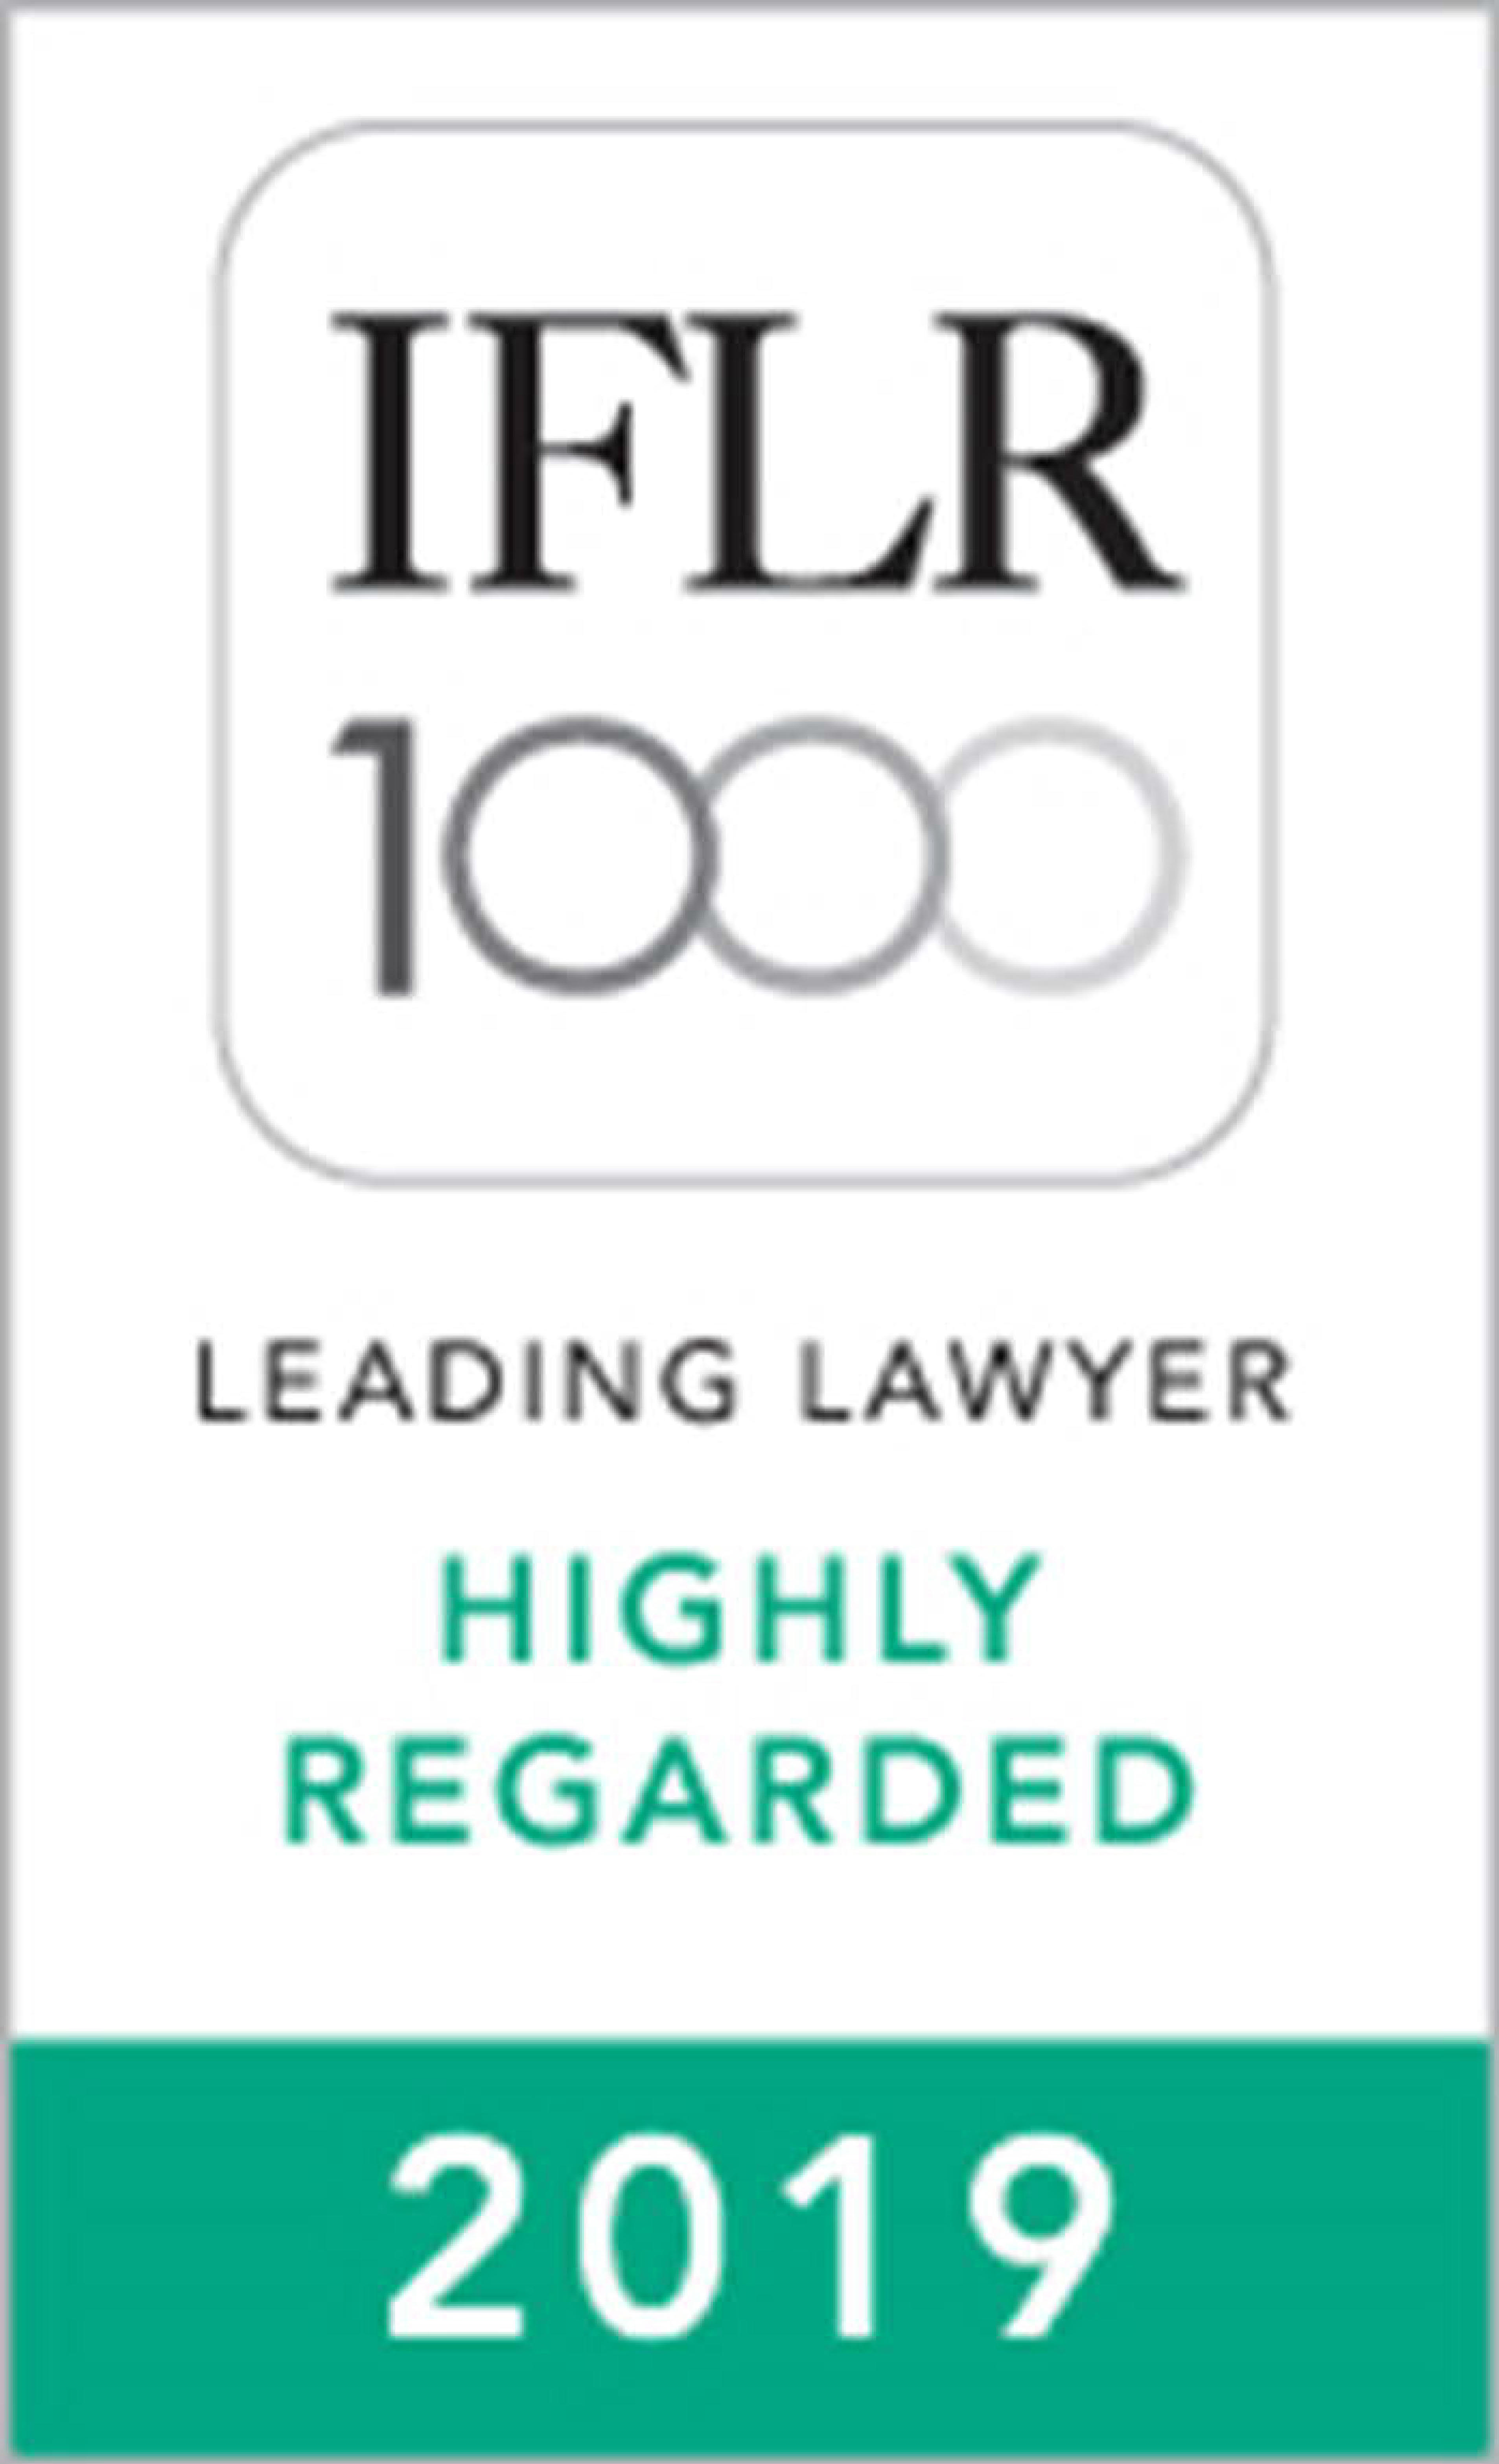 Highly Regarded Leading Lawyer in Financial & Corporate Law by IFLR1000, 2015-2019